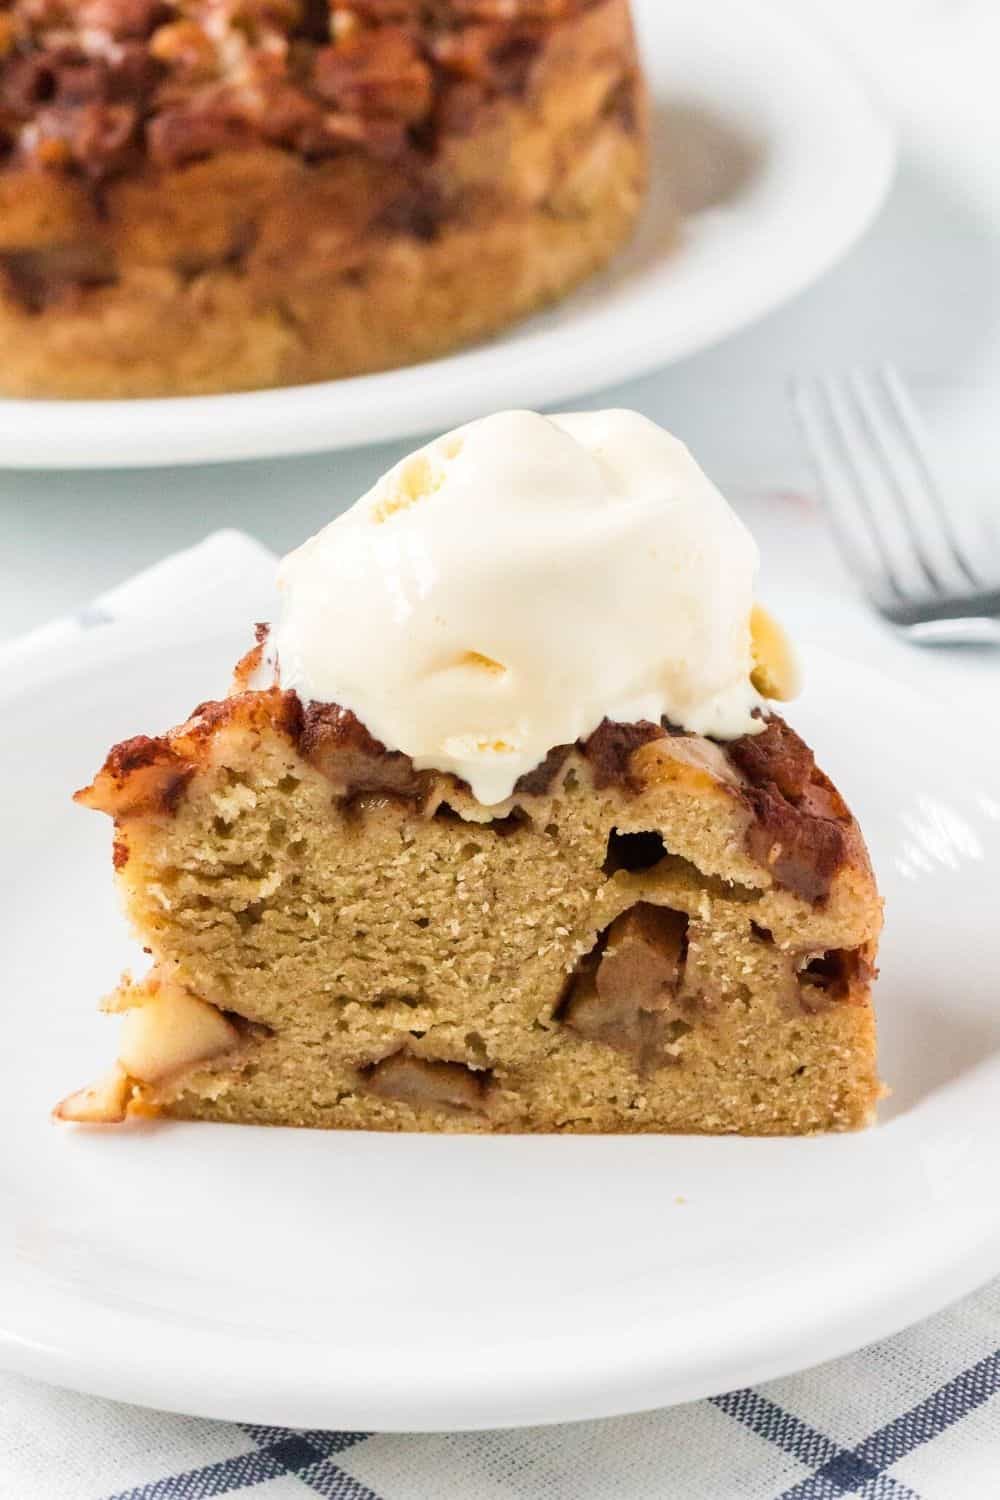 a slice of apple cake cooked in the instant pot served on a white plate, topped with ice cream